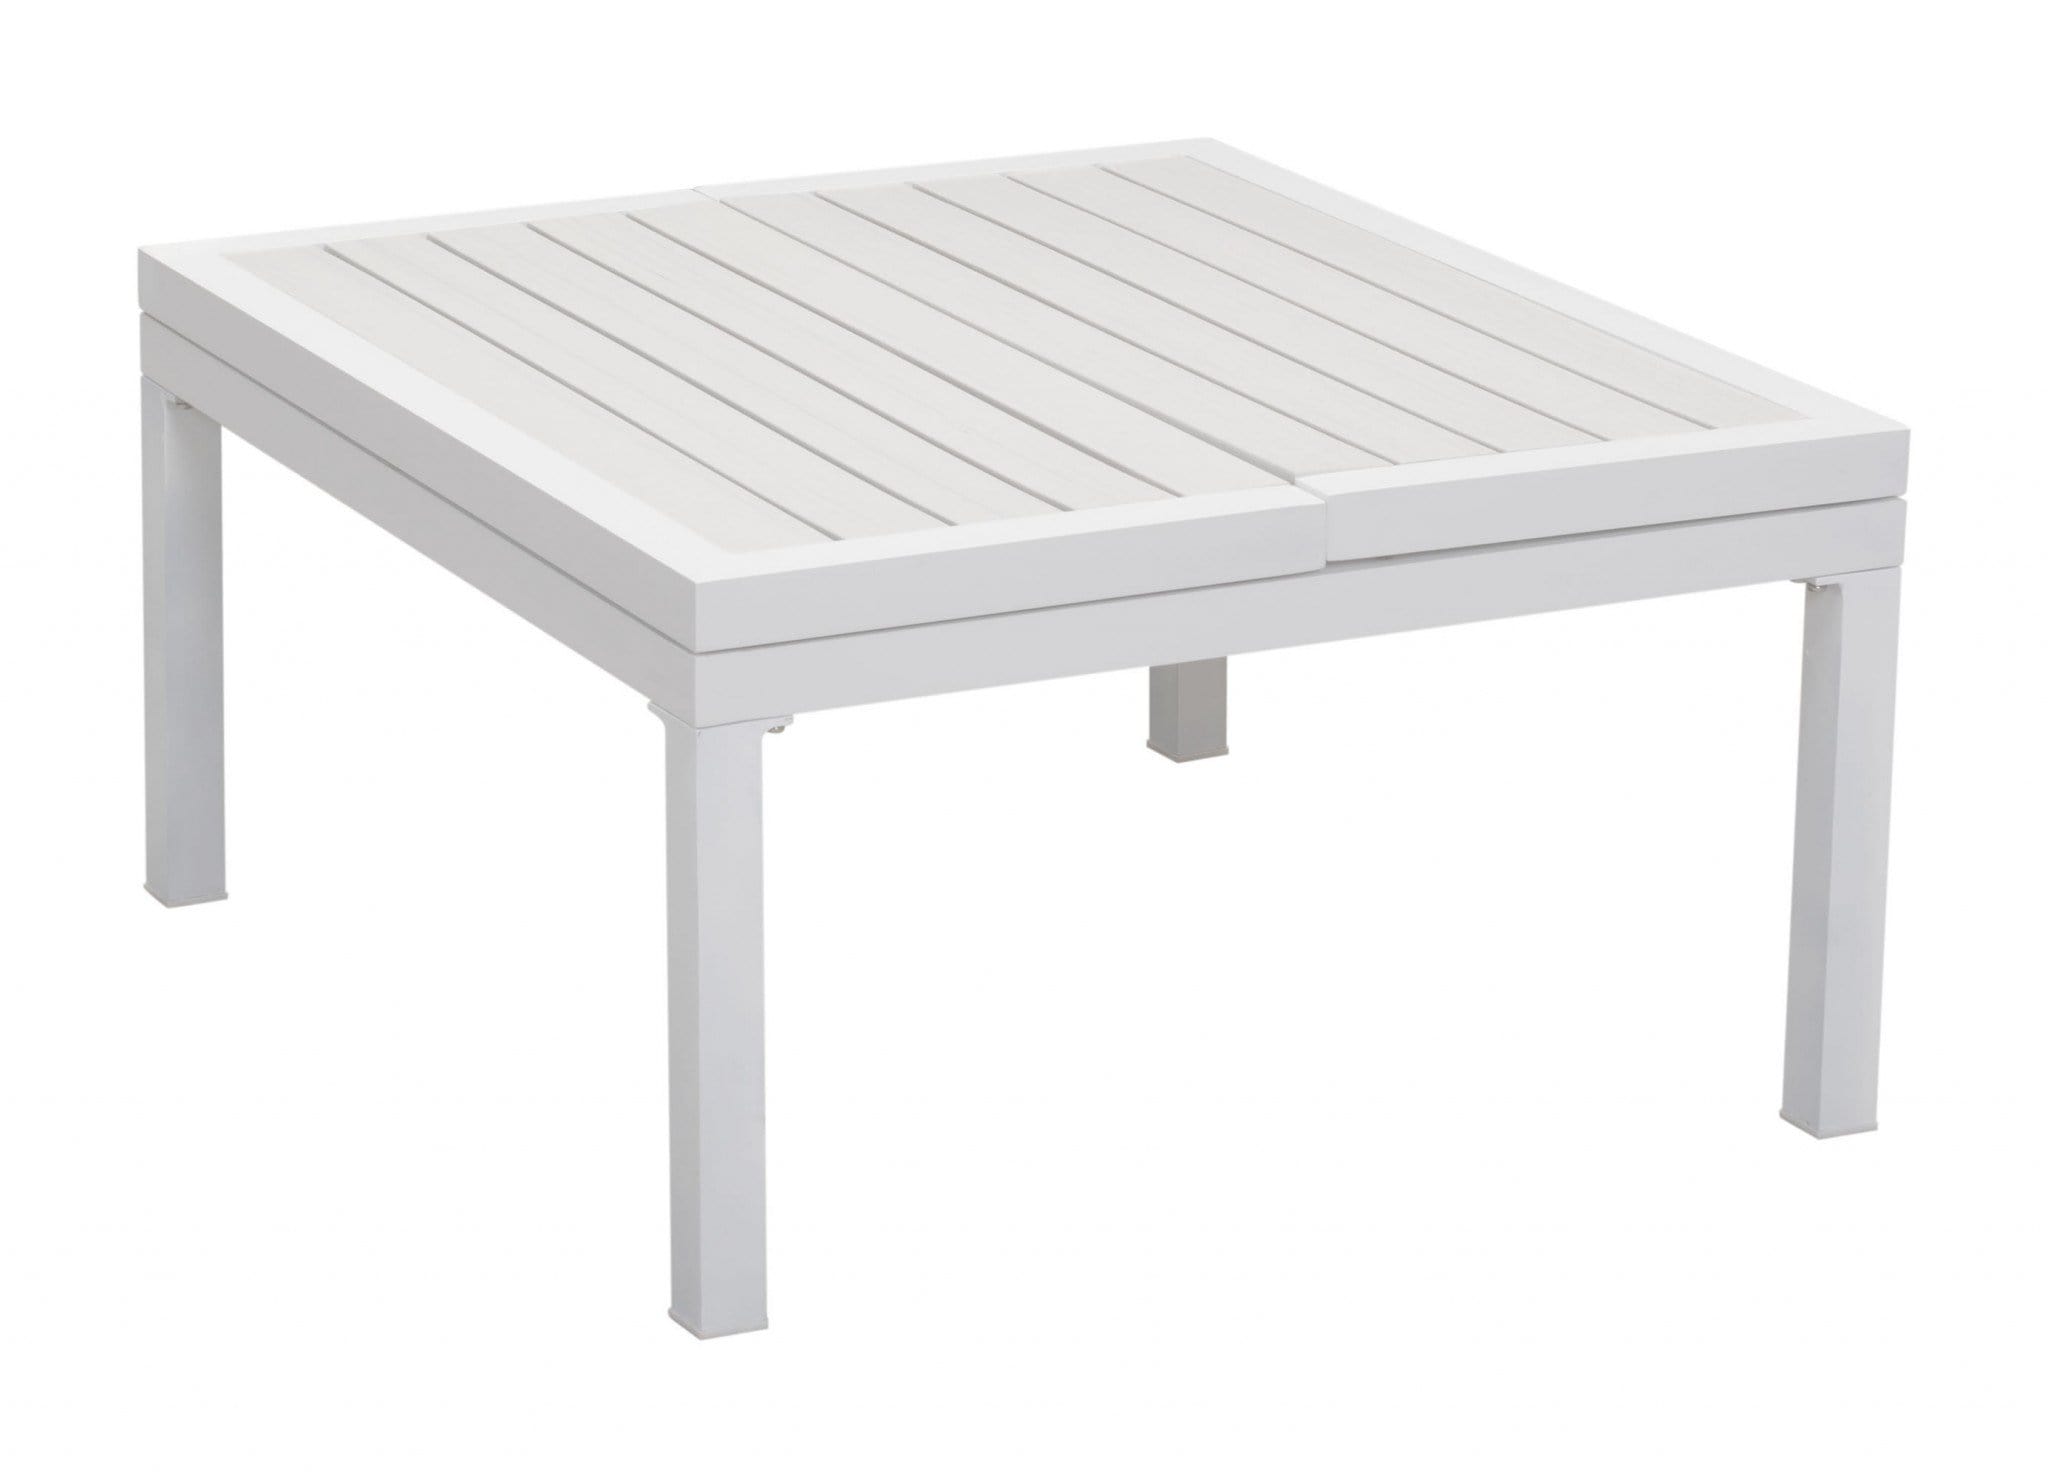 HomeRoots Outdoors Outdoor Furniture > Outdoor Tables White / Polyresin, Powder Coated Aluminum 33.5" x 30.7" x 17.1" White, Polyresin, Powder Coated Aluminum, Lift-Top Coffee Table